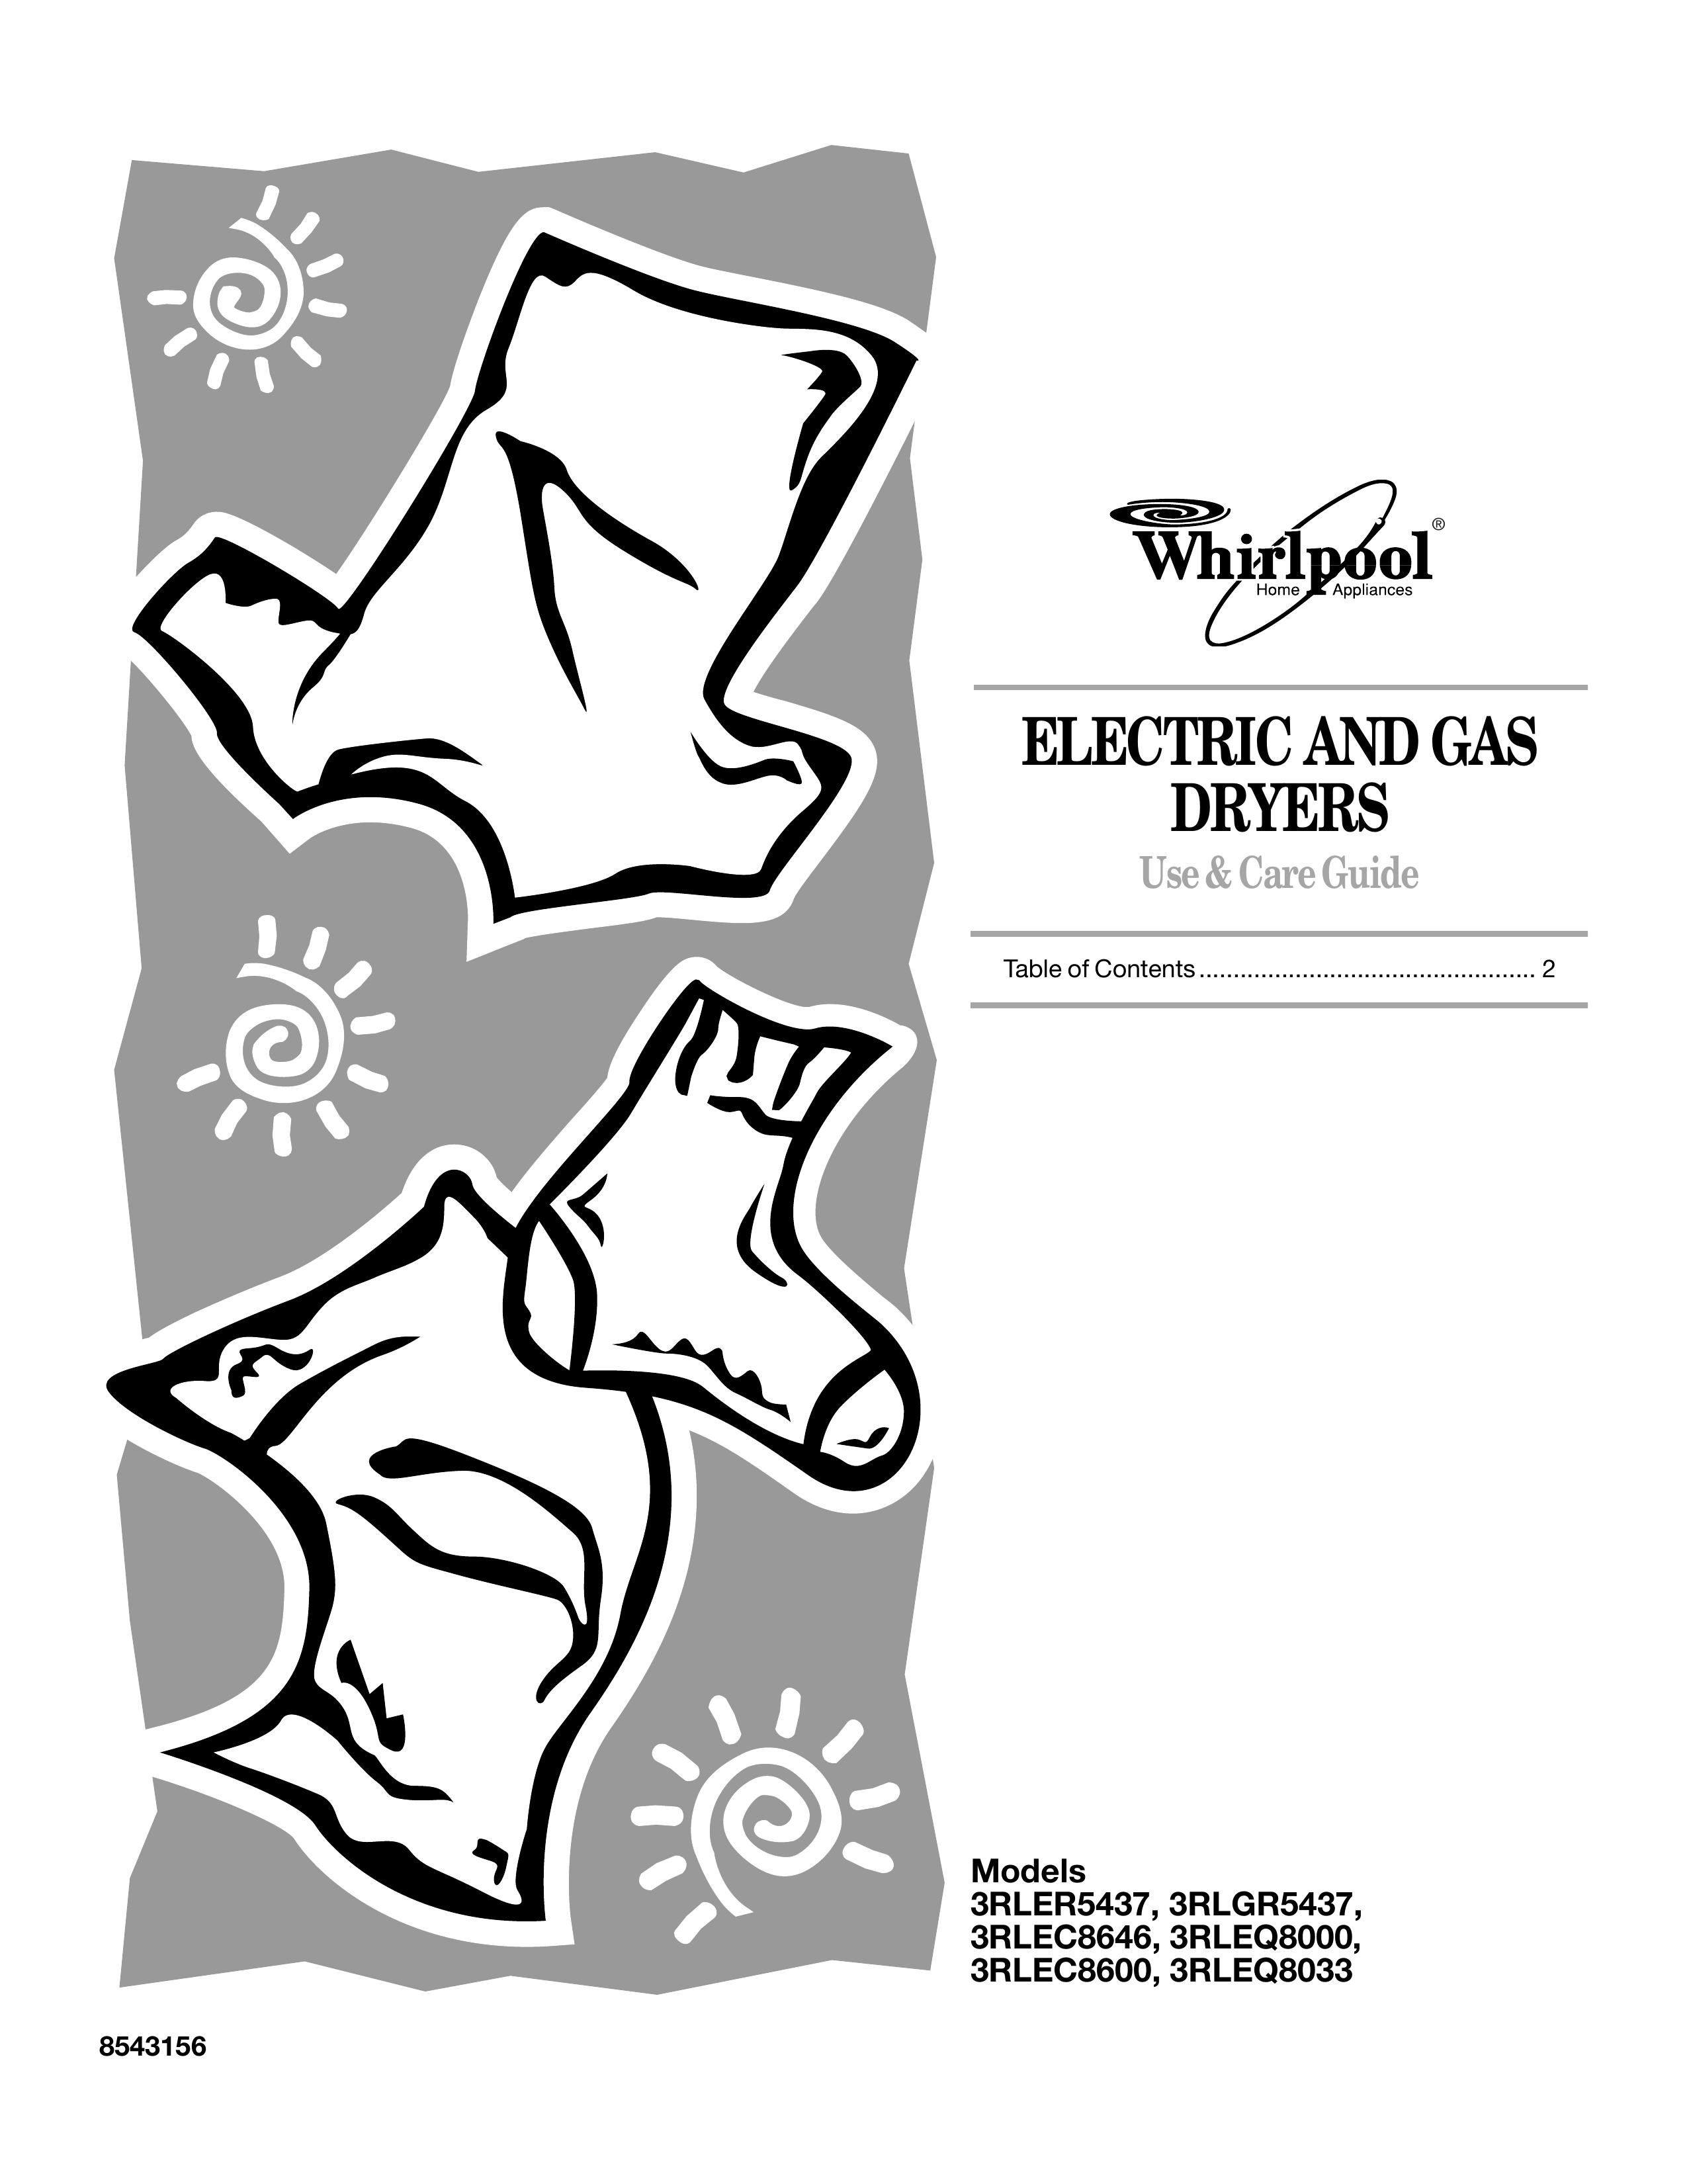 Whirlpool 3RLEQ8033 Clothes Dryer User Manual